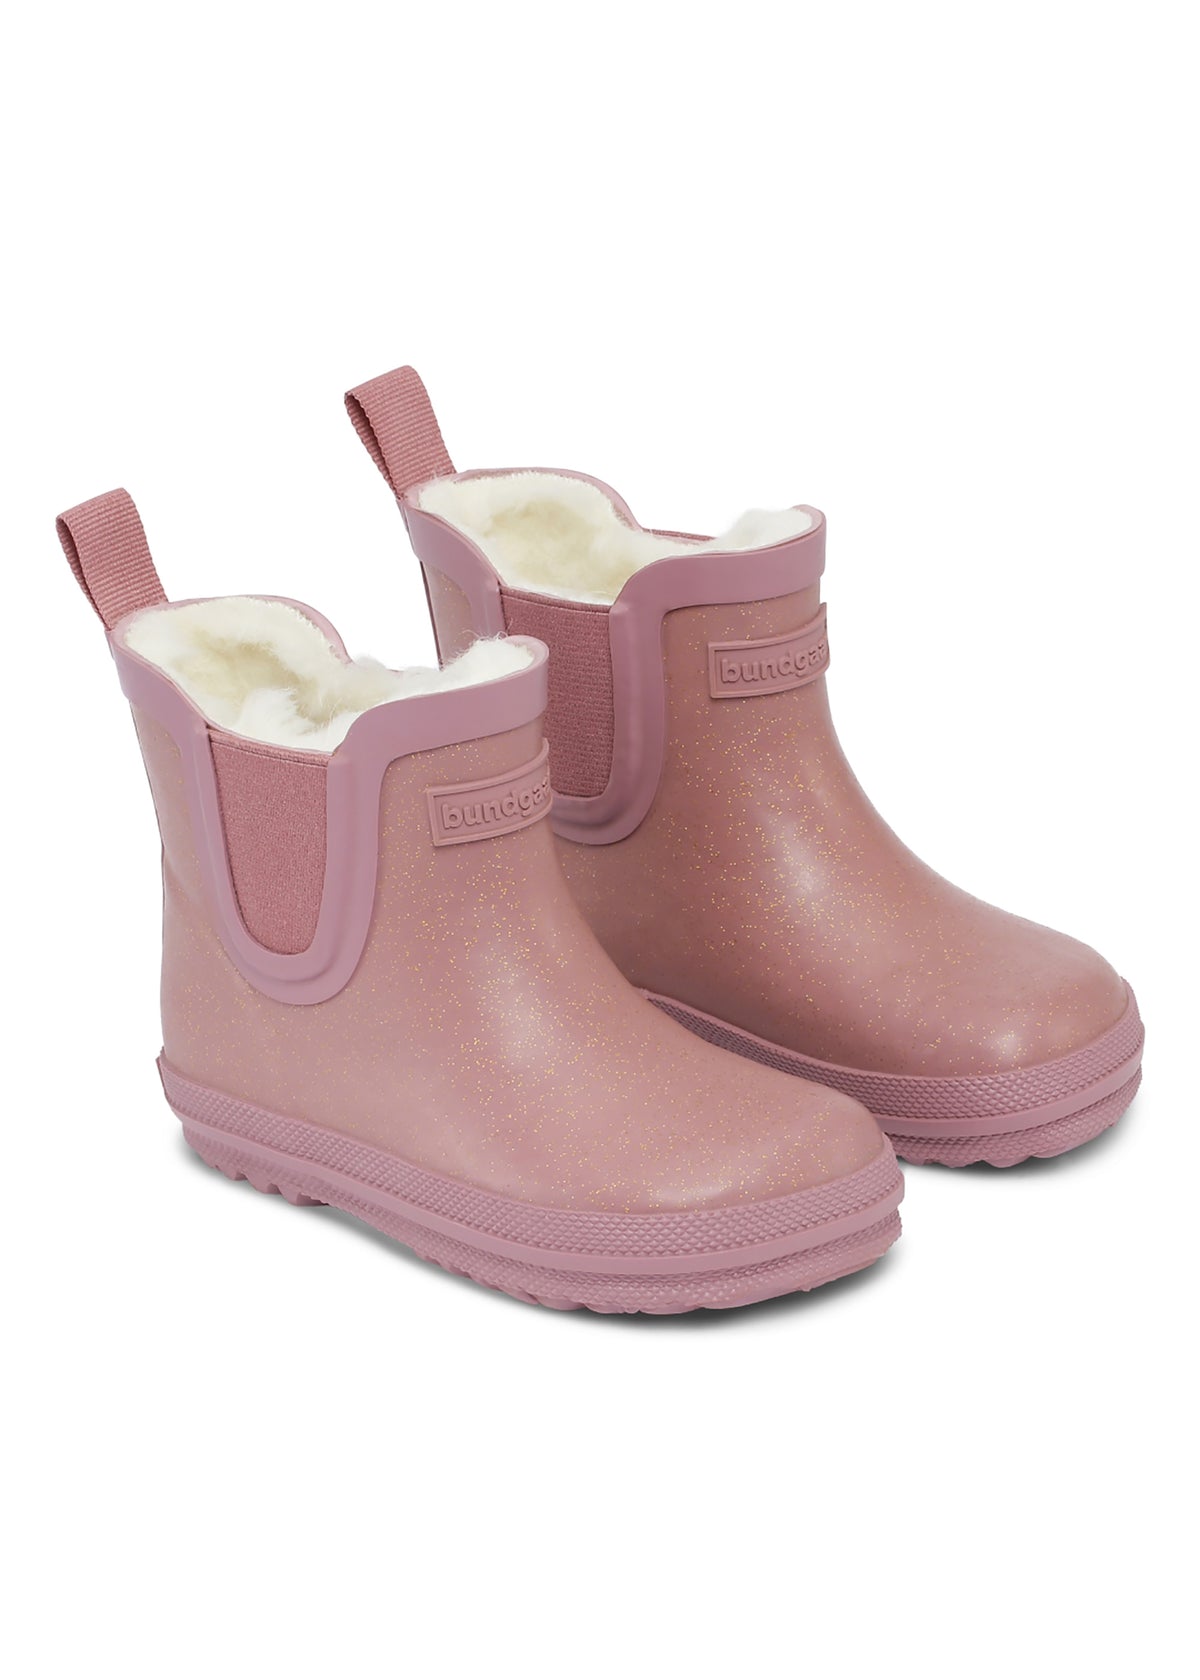 Rubber boots with a warm lining - light pink, short shaft, Charly Low Warm